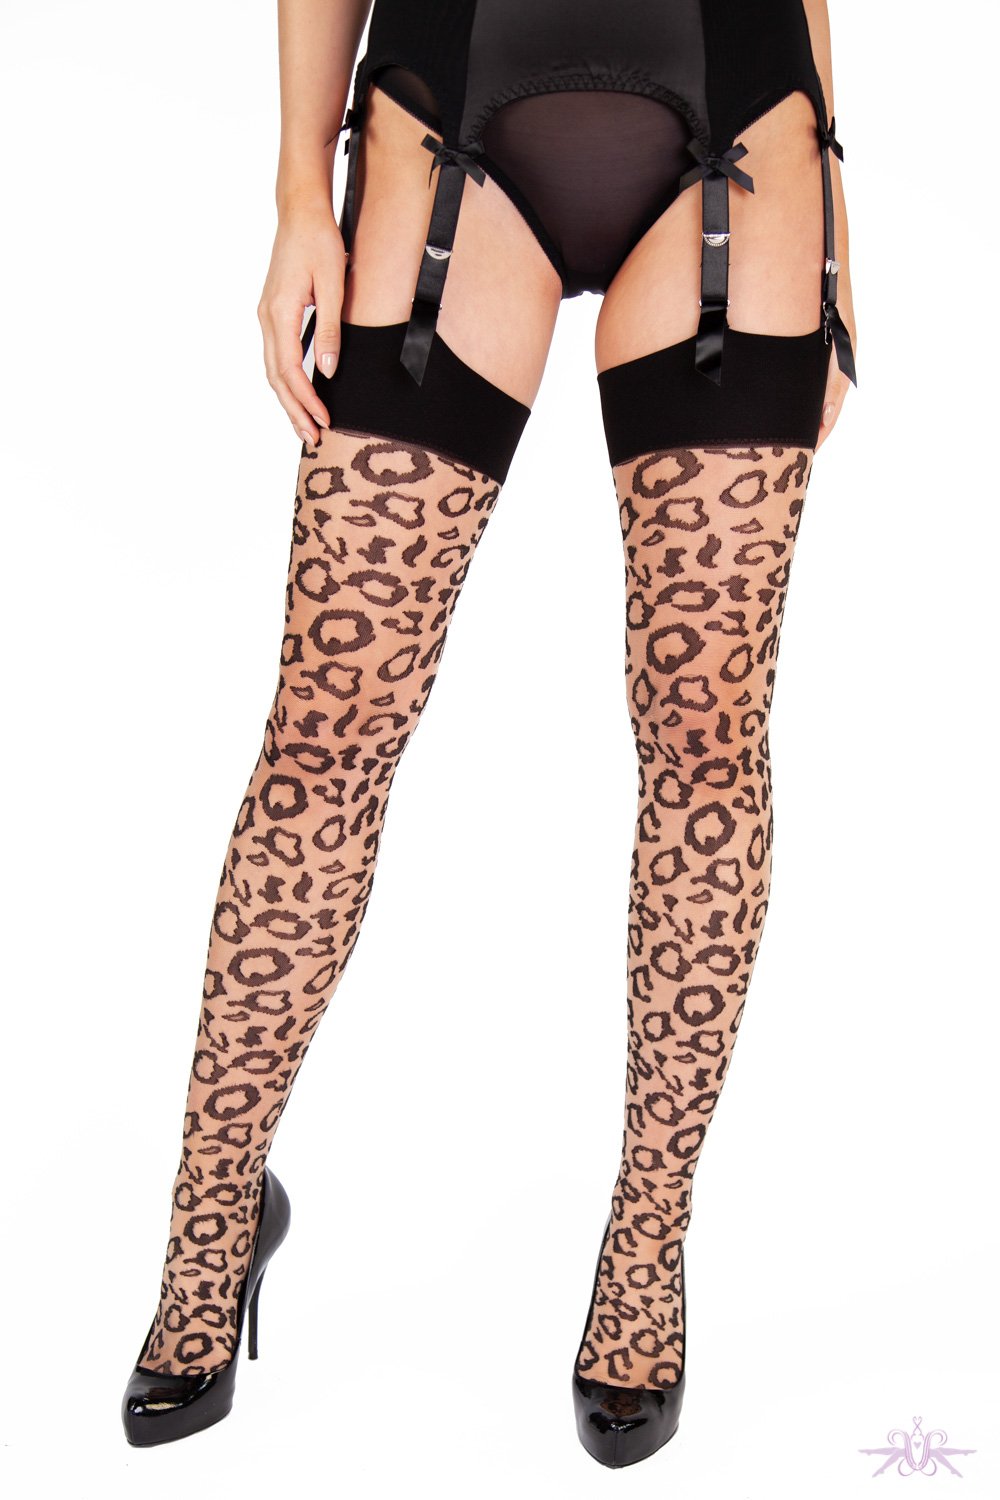 Trasparenze Lives Leopard Print Tights at Mayfair Stockings